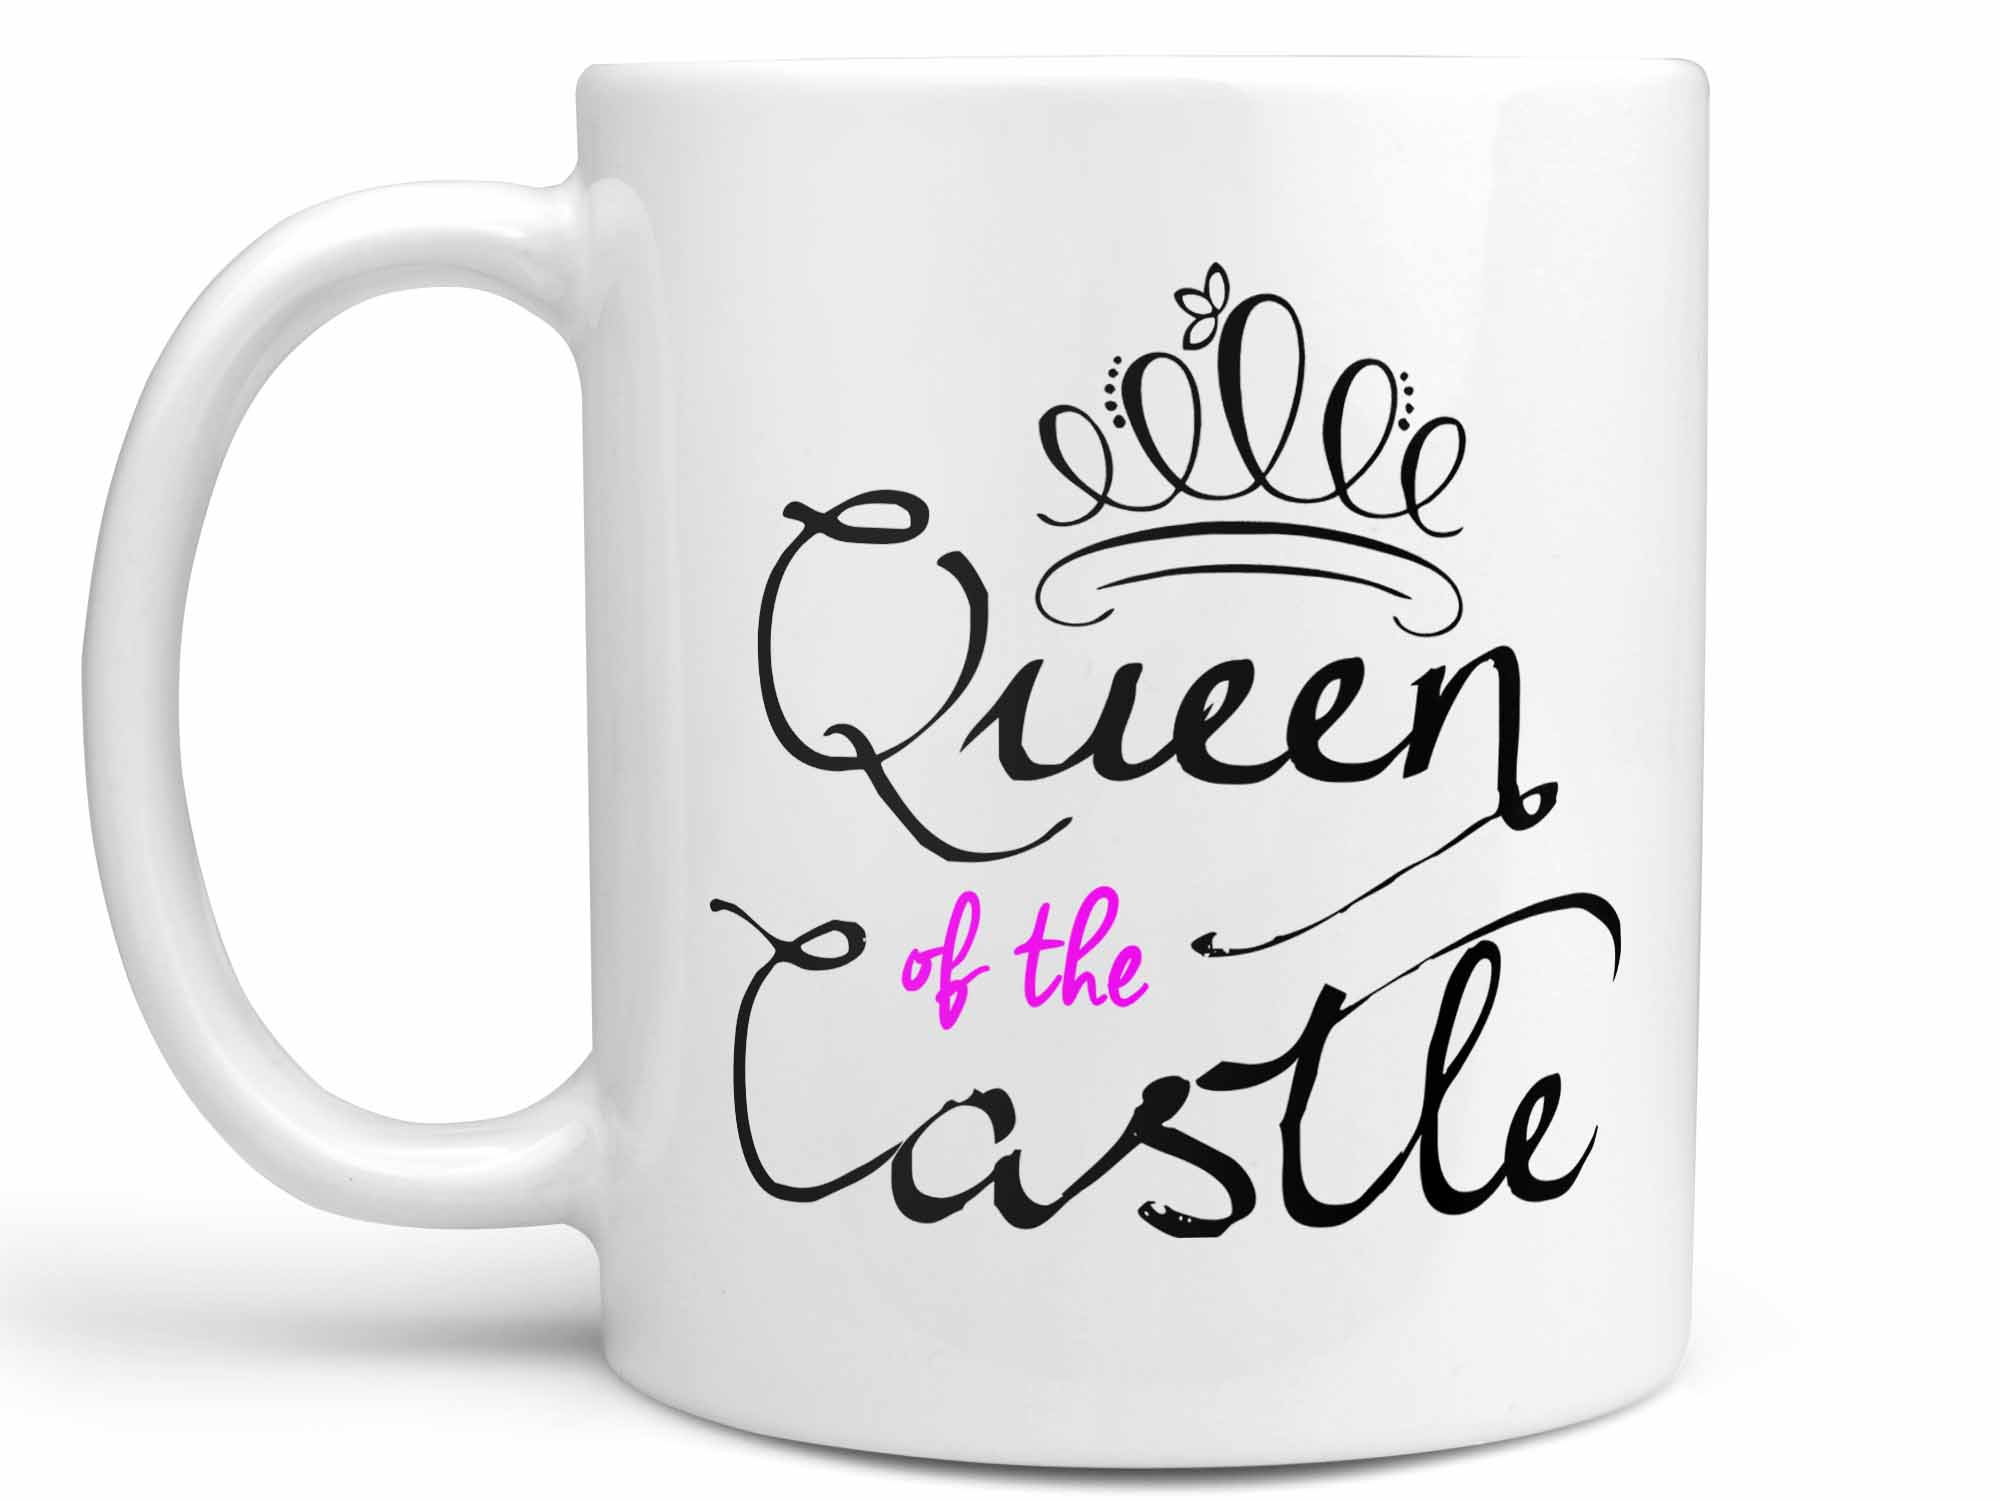 Queen of the Castle Coffee Mug